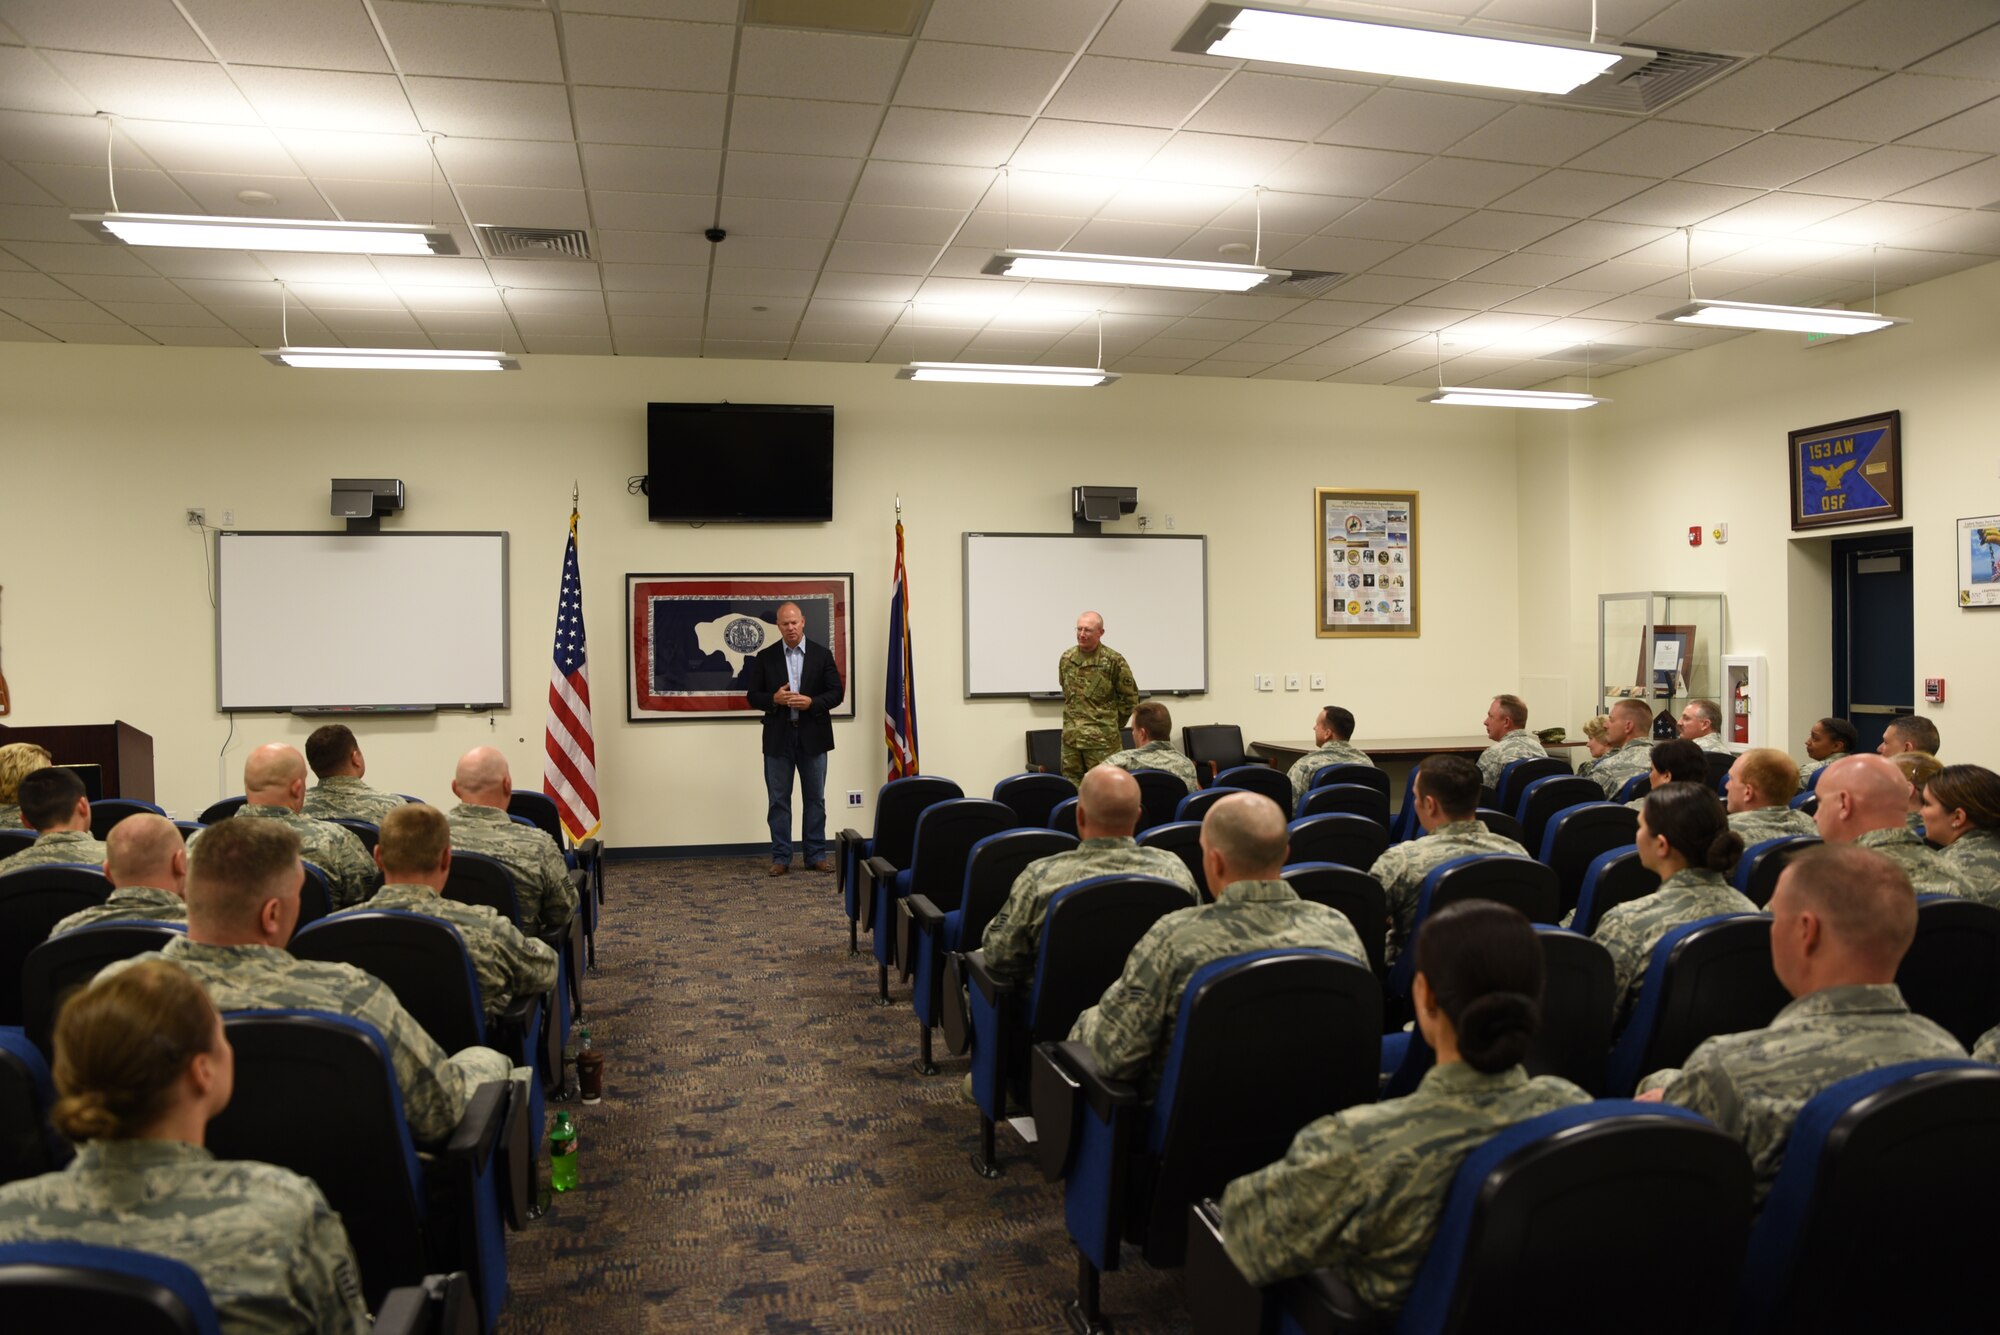 Gov. Matt Mead, Wyoming governor, speaks to deploying airmen from the 153rd Airlift Wing, Wyoming Air National Guard June 5, 2016, at Cheyenne Air National Guard Base in Cheyenne, Wyoming. Mead used this opportunity as a chance to let those airmen know their sacrifices are appreciated by the state of Wyoming and its citizens. (U.S. Air National Guard photo by Senior Airman Nichole Grady).